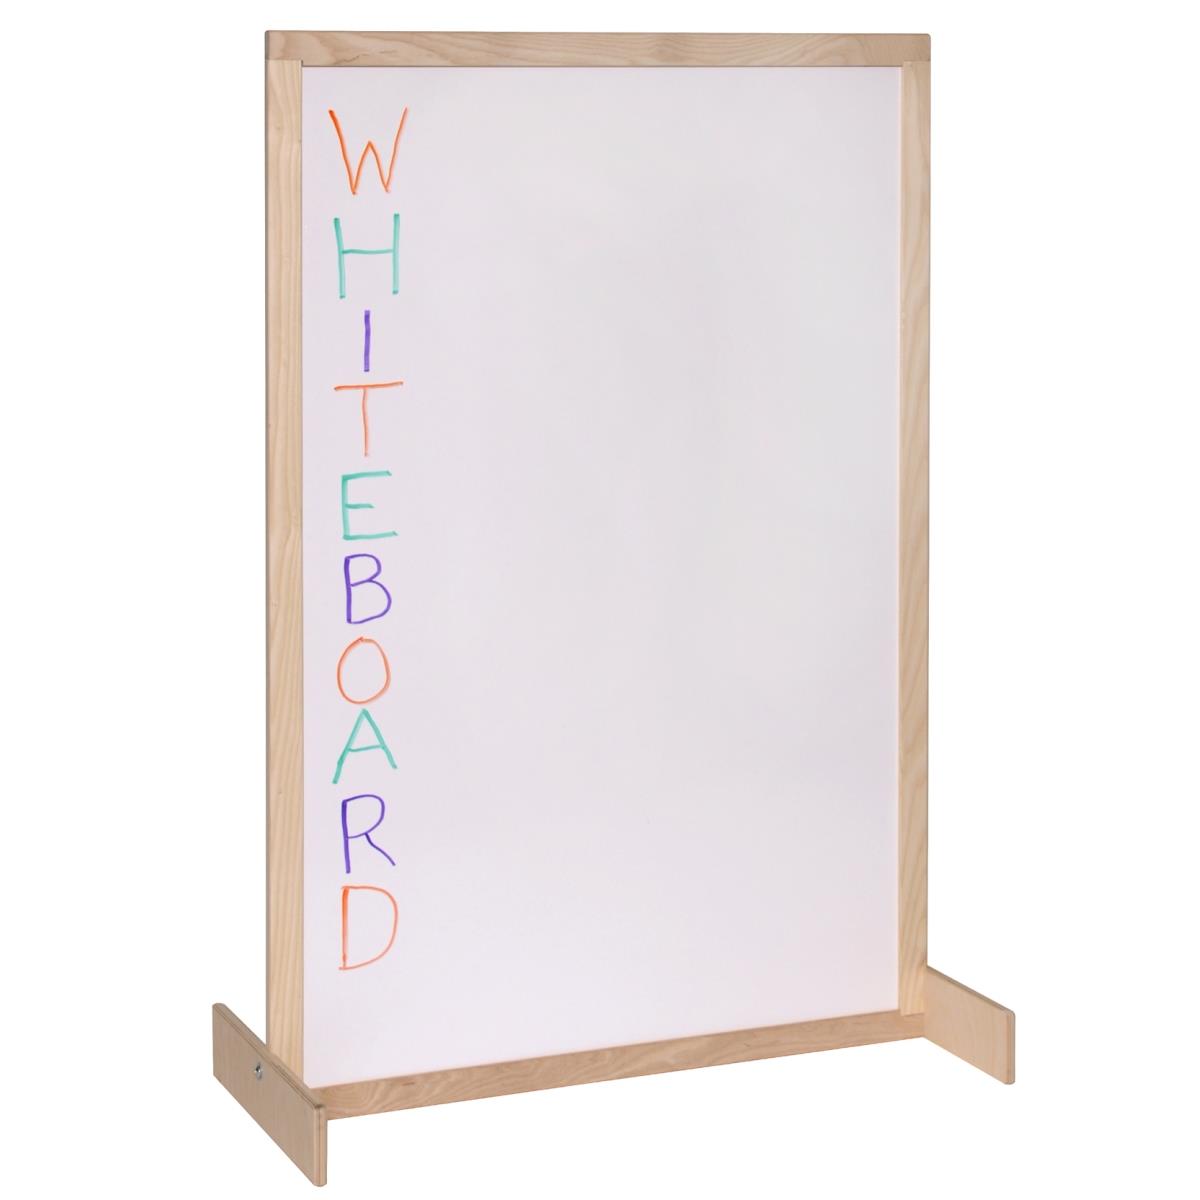 Angeles Ang1124 Whiteboard Room Maple Divider - Natural Wood - 32 X 15 X 48 In.